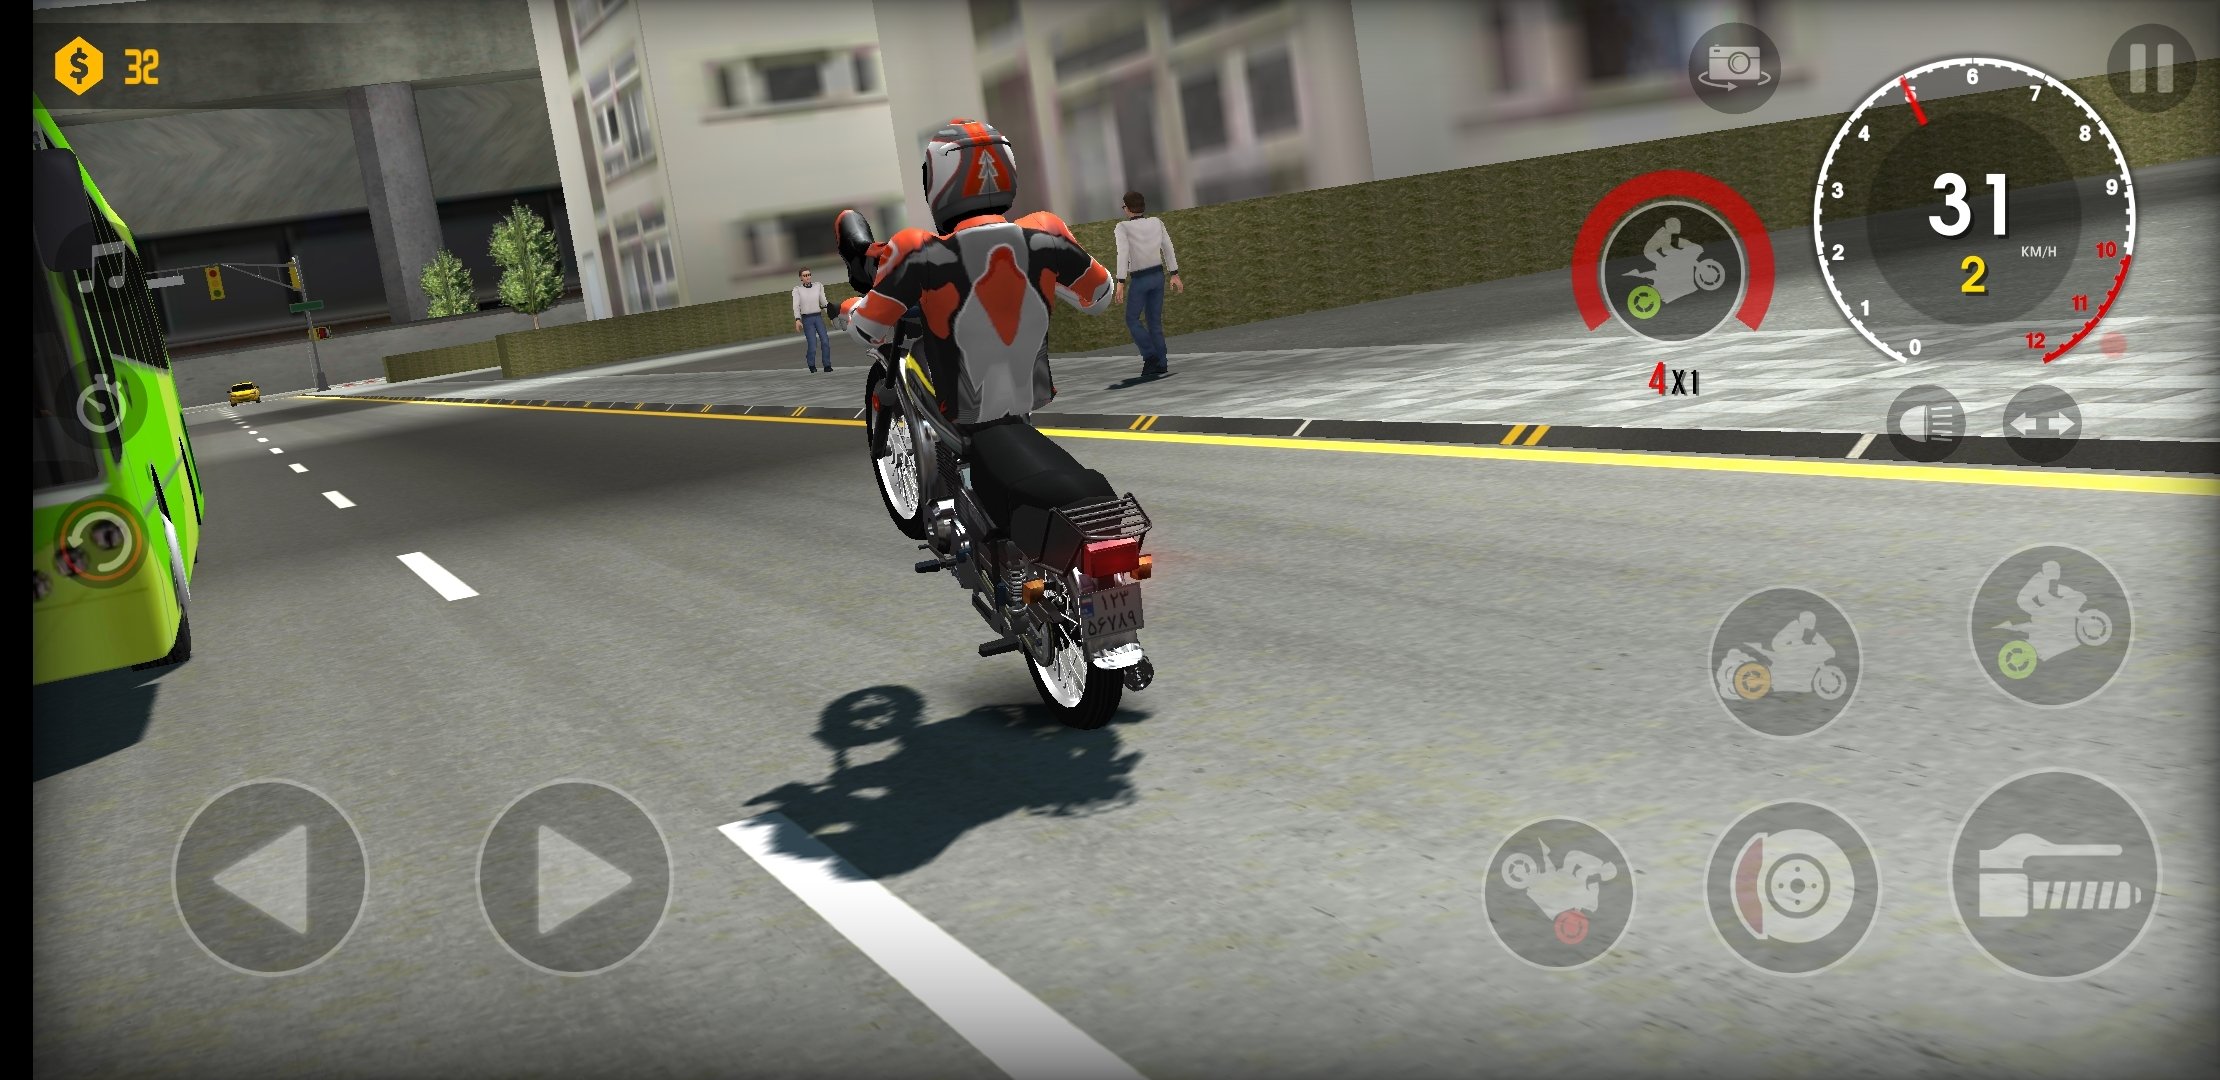 Xtreme Motorbikes 1.5 - Download for Android APK Free